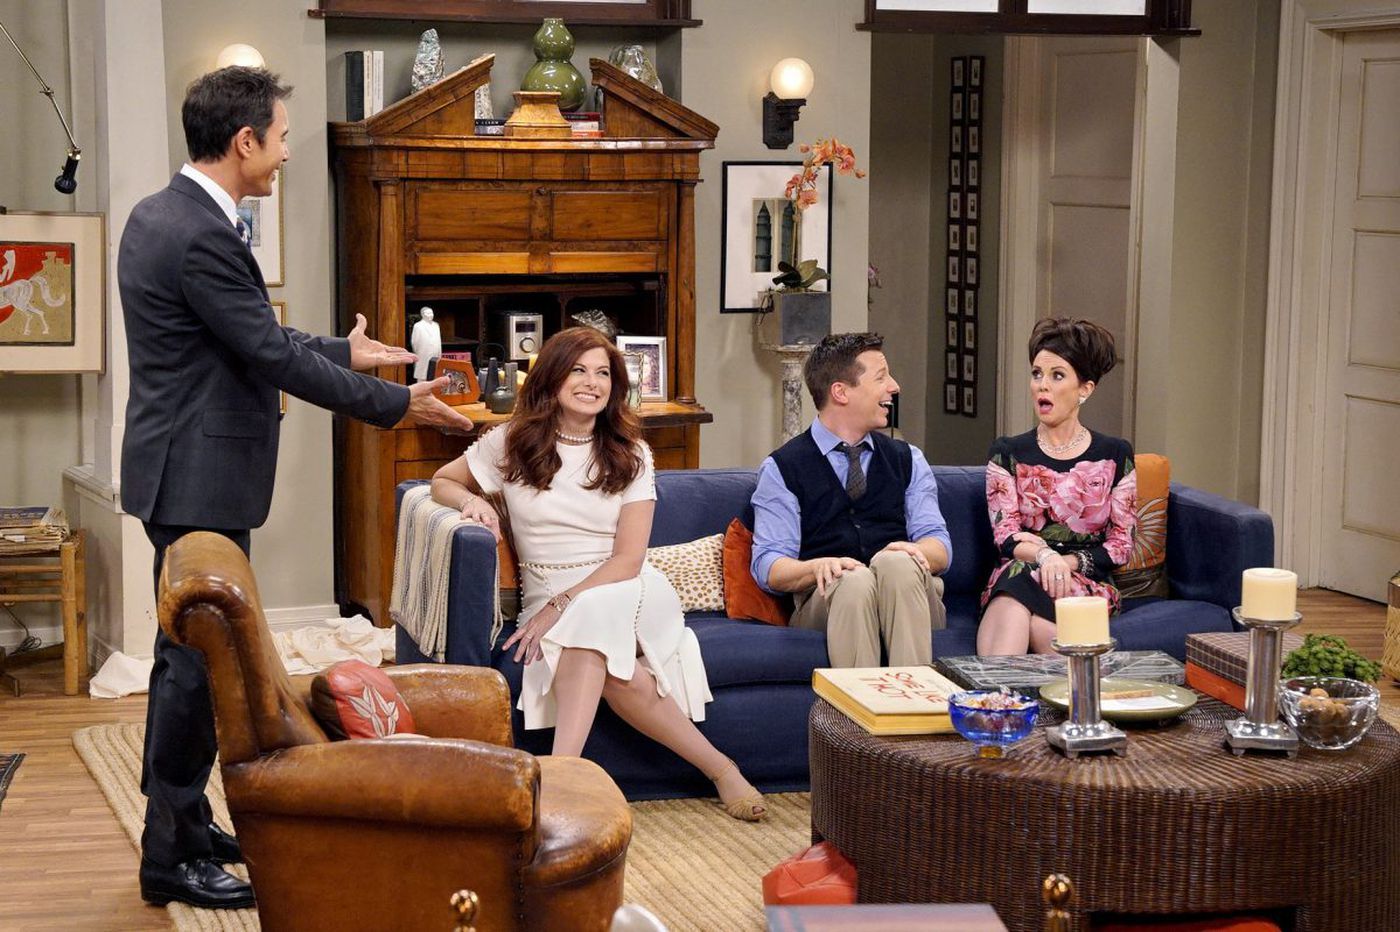 Original Cast of Will and Grace on set for the reboot series